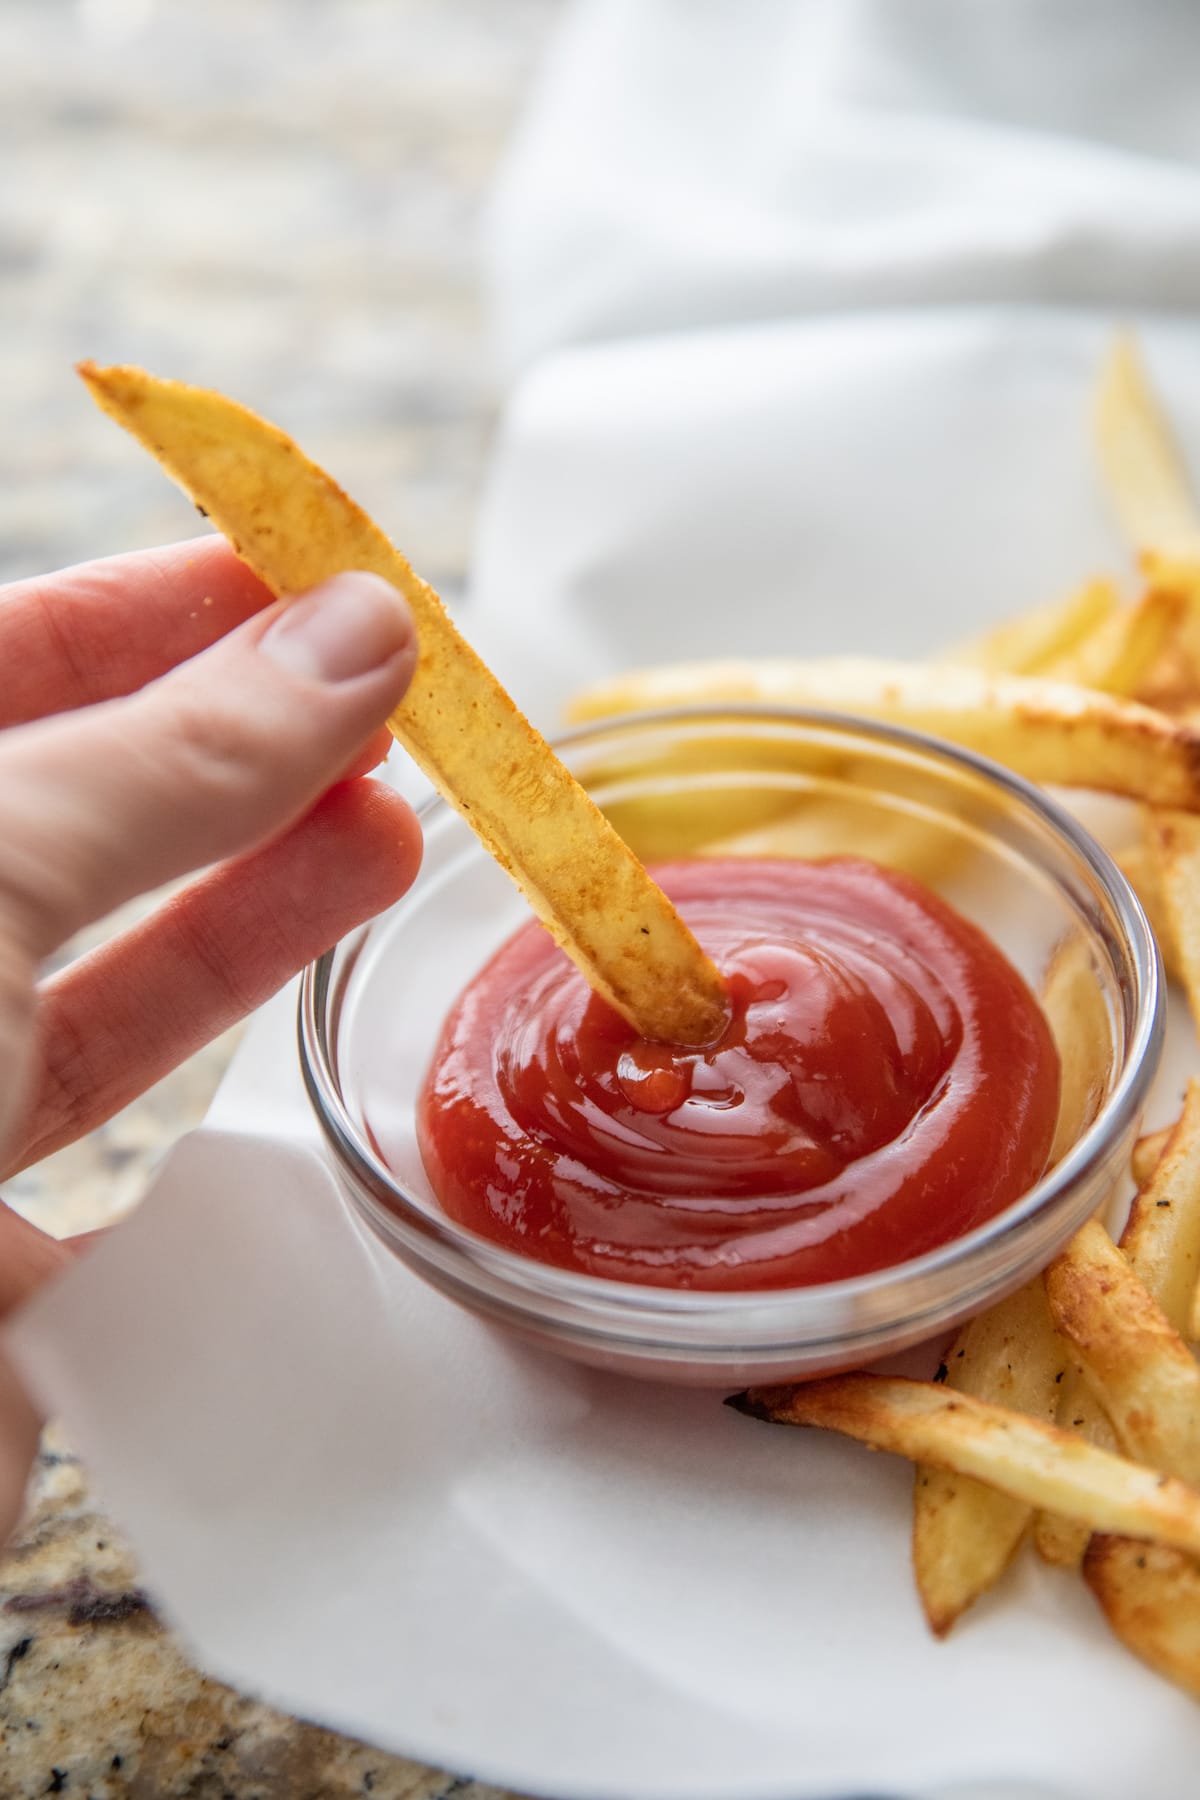 dipping french fry into ketchup